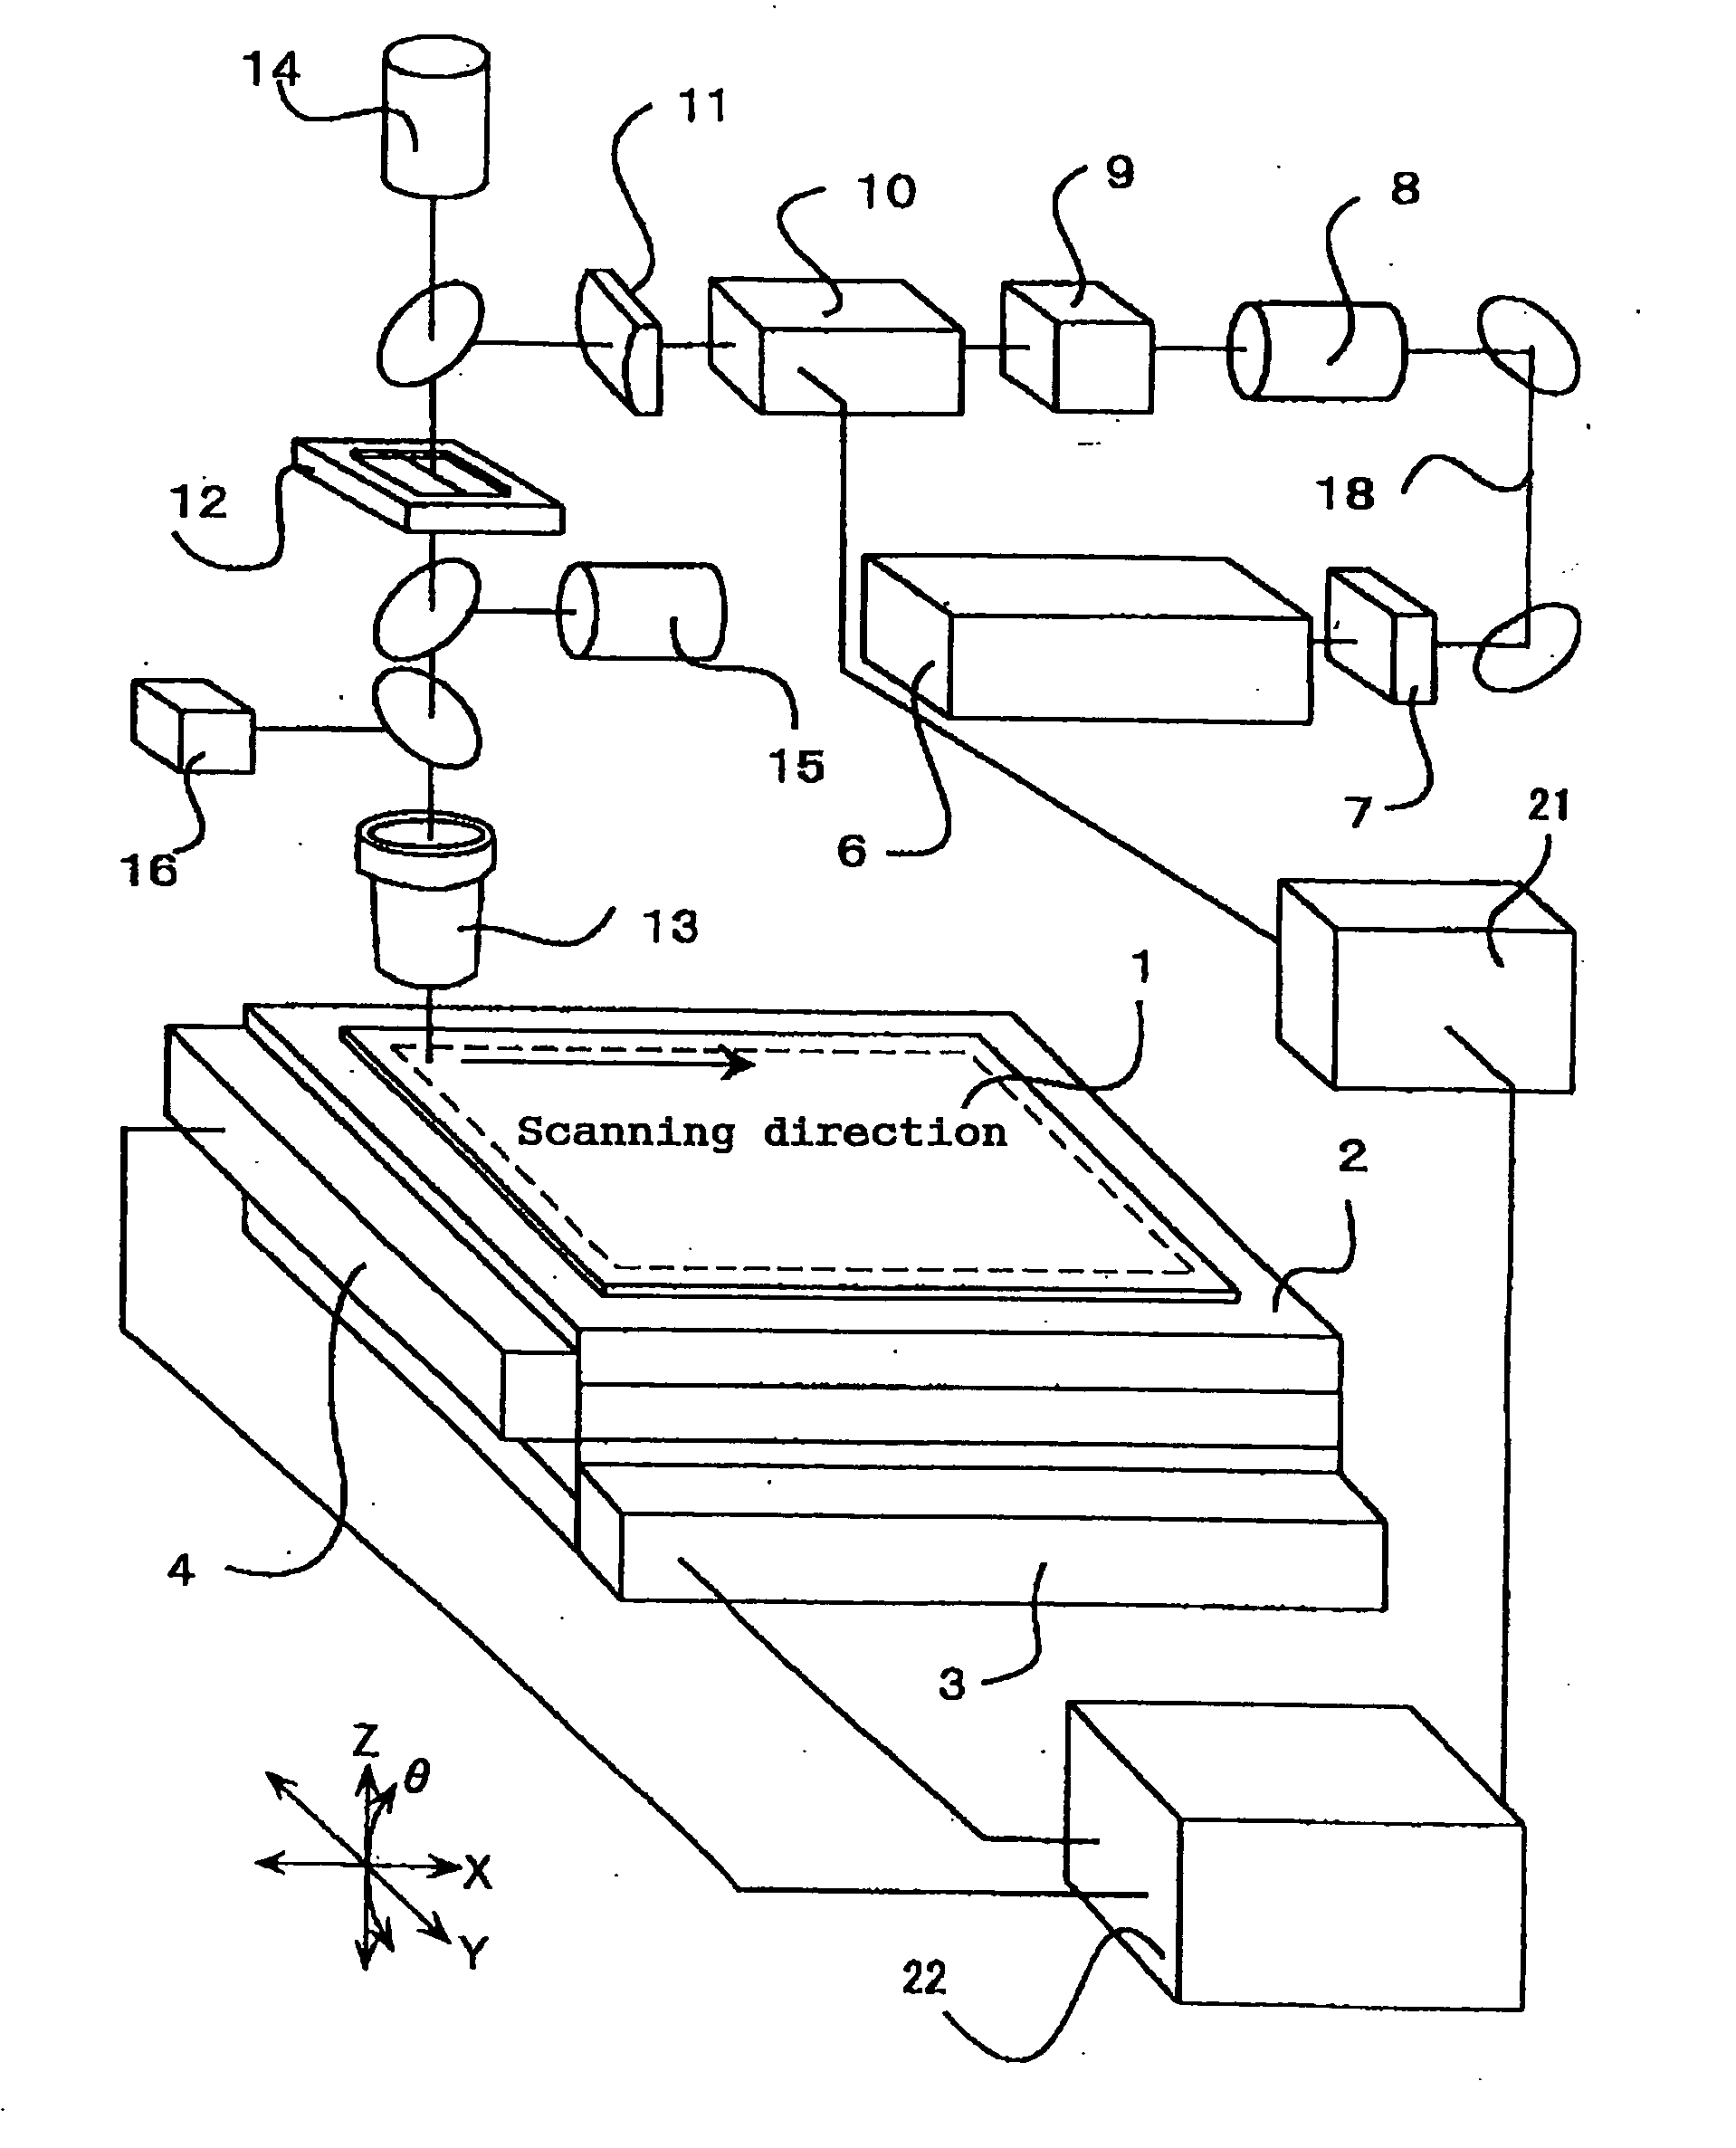 Apparatus for fabricating a display device